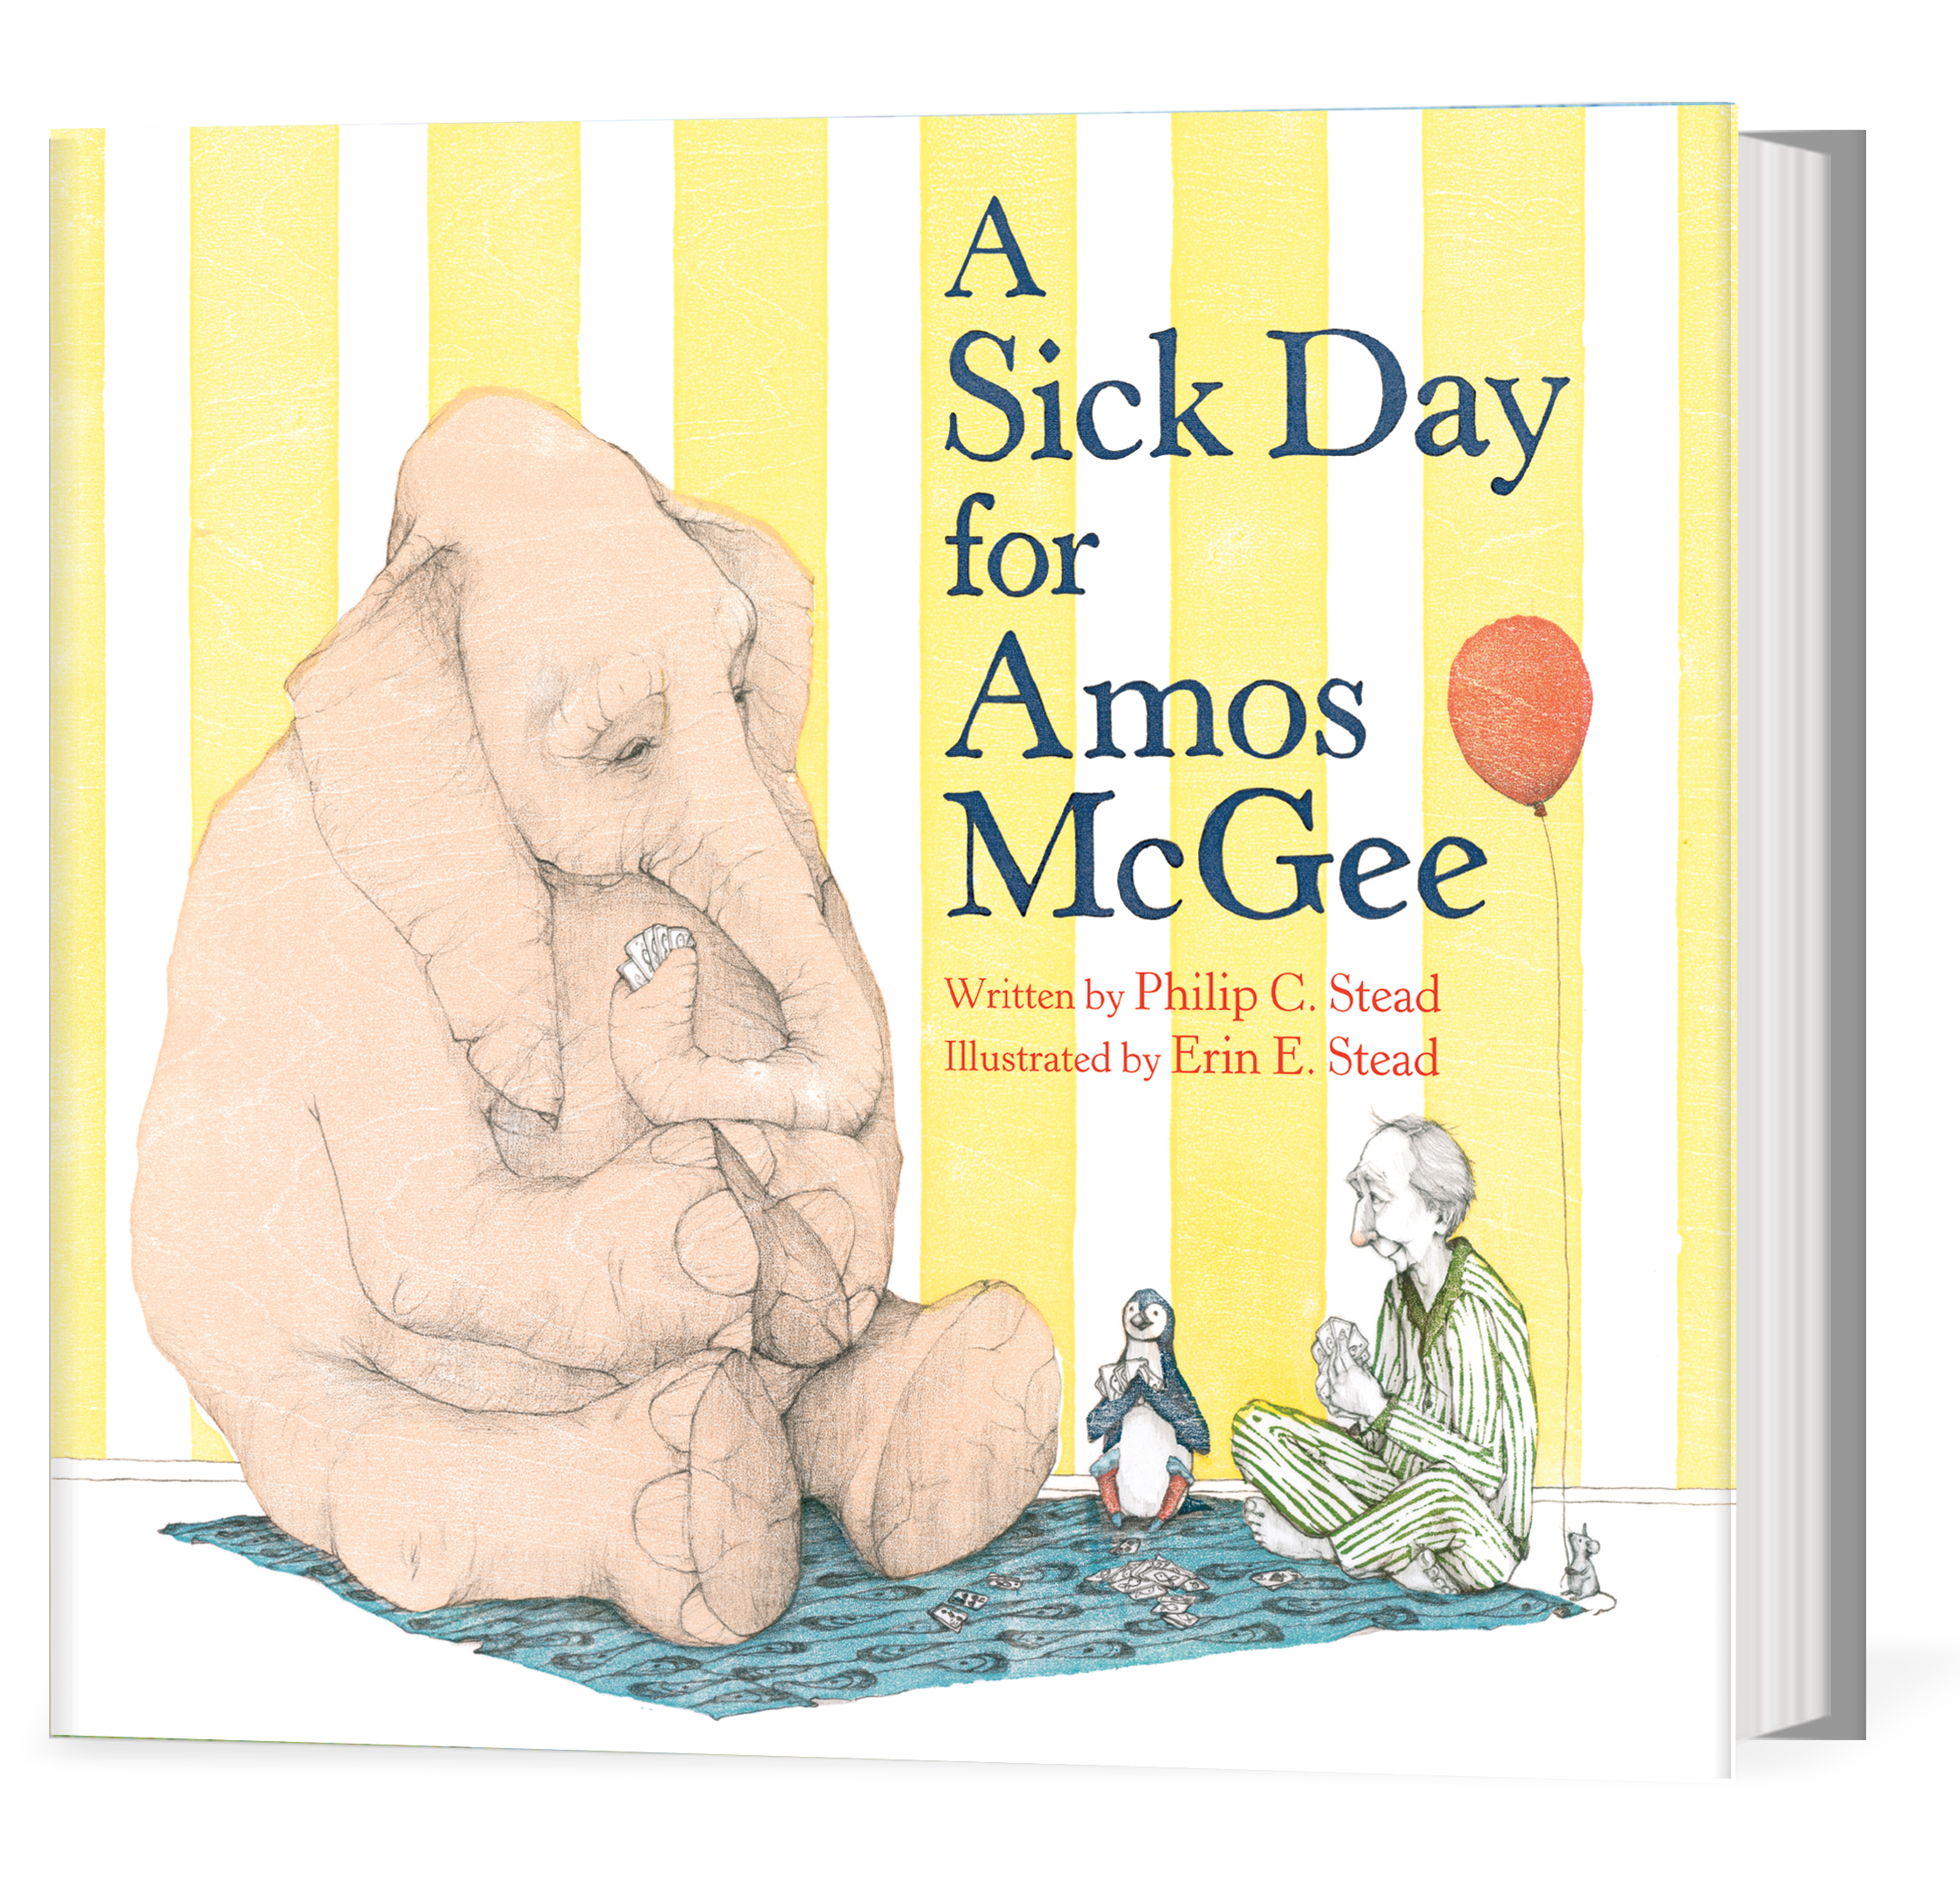 feature A Sick Day for Amos McGee